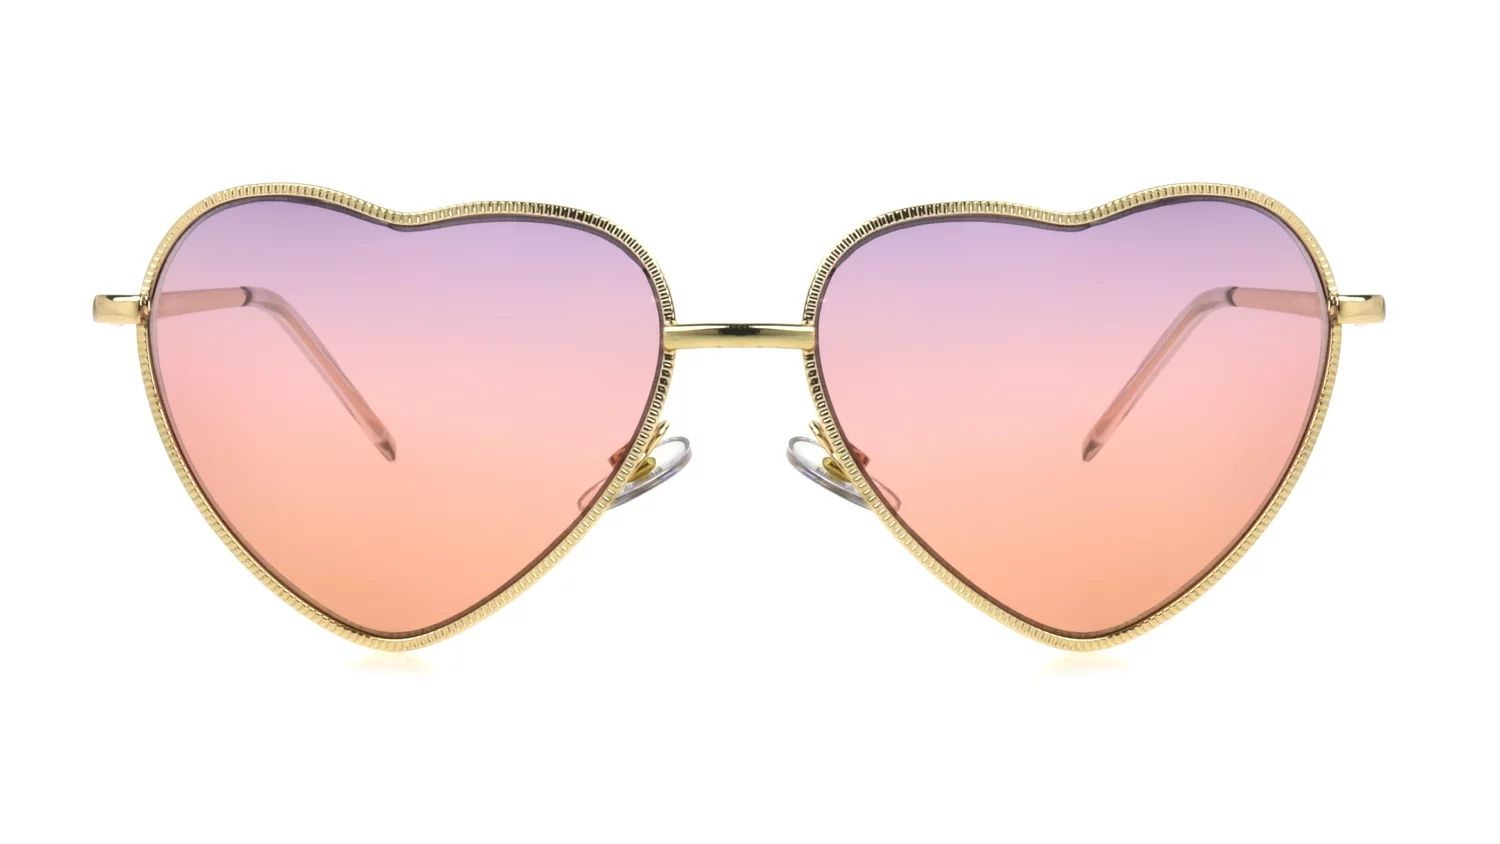 Sunsentials By Foster Grant Women's Heart-Shaped Sunglasses, Gold | Walmart (US)